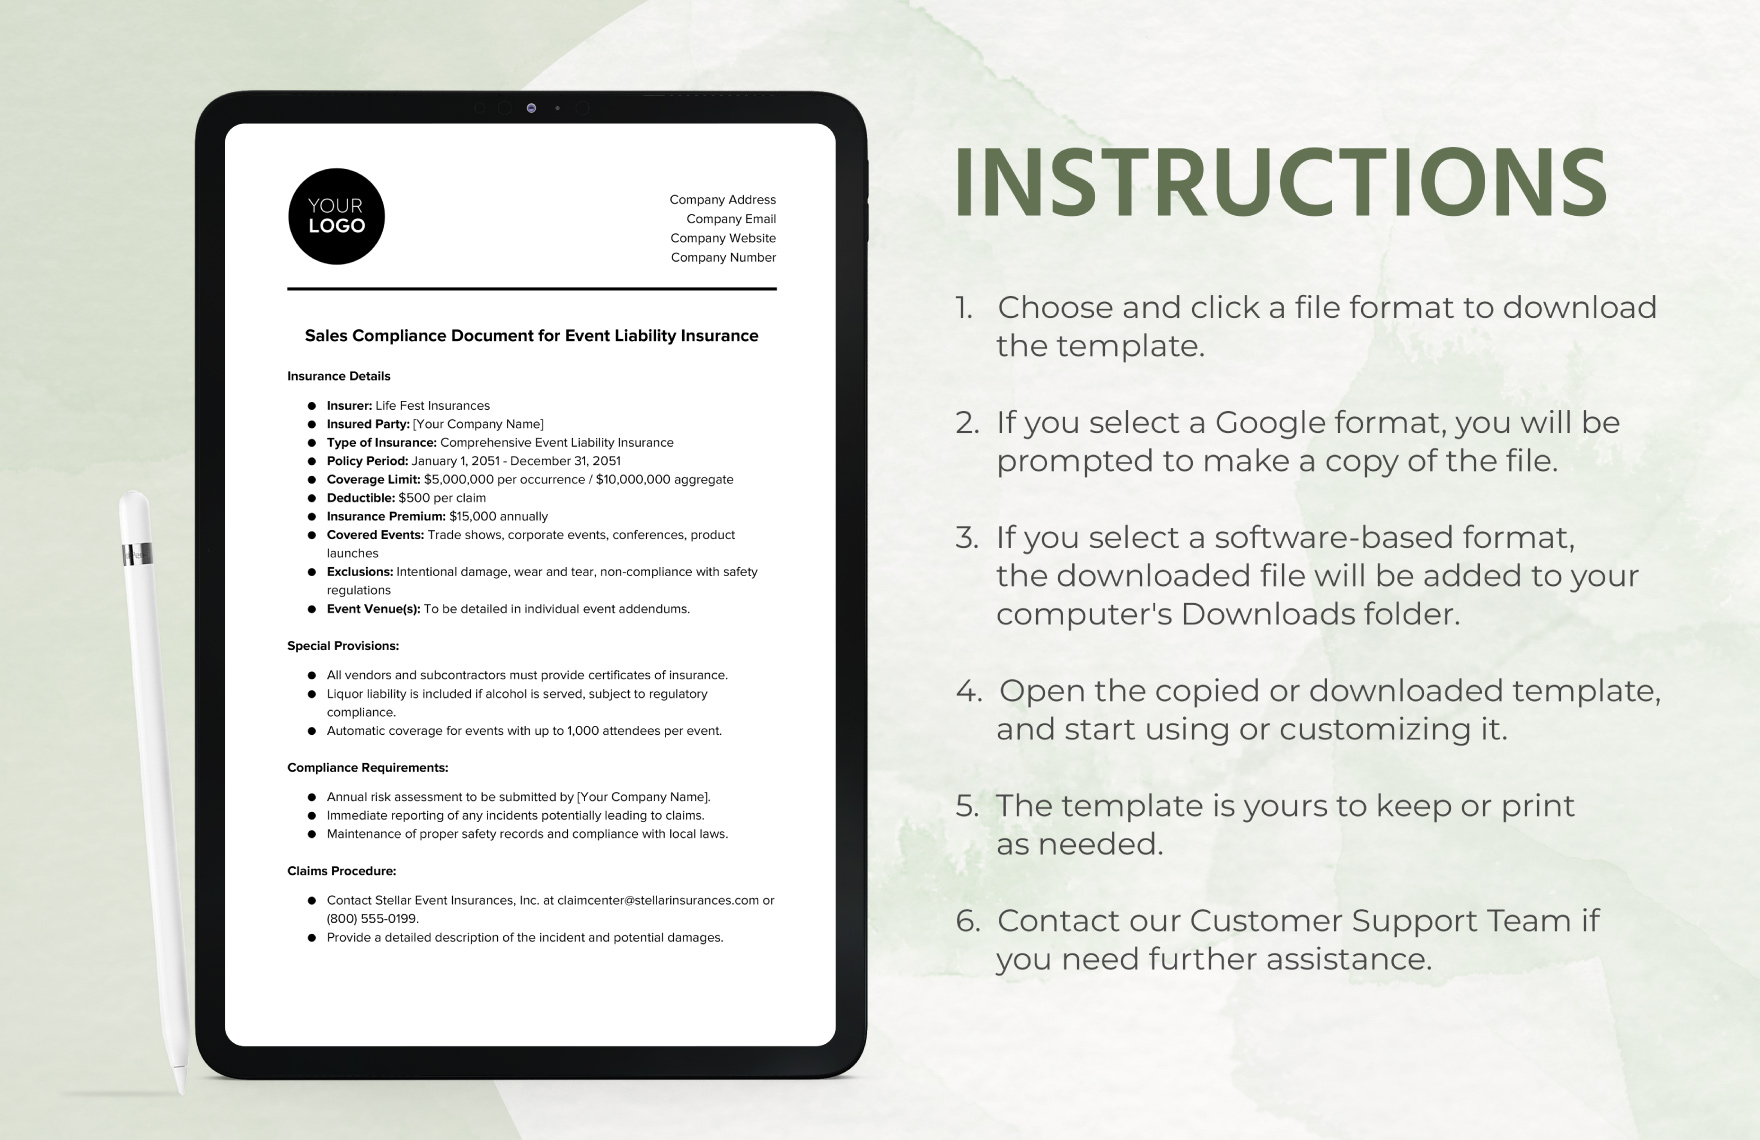 Sales Compliance Document for Event Liability Insurance Template